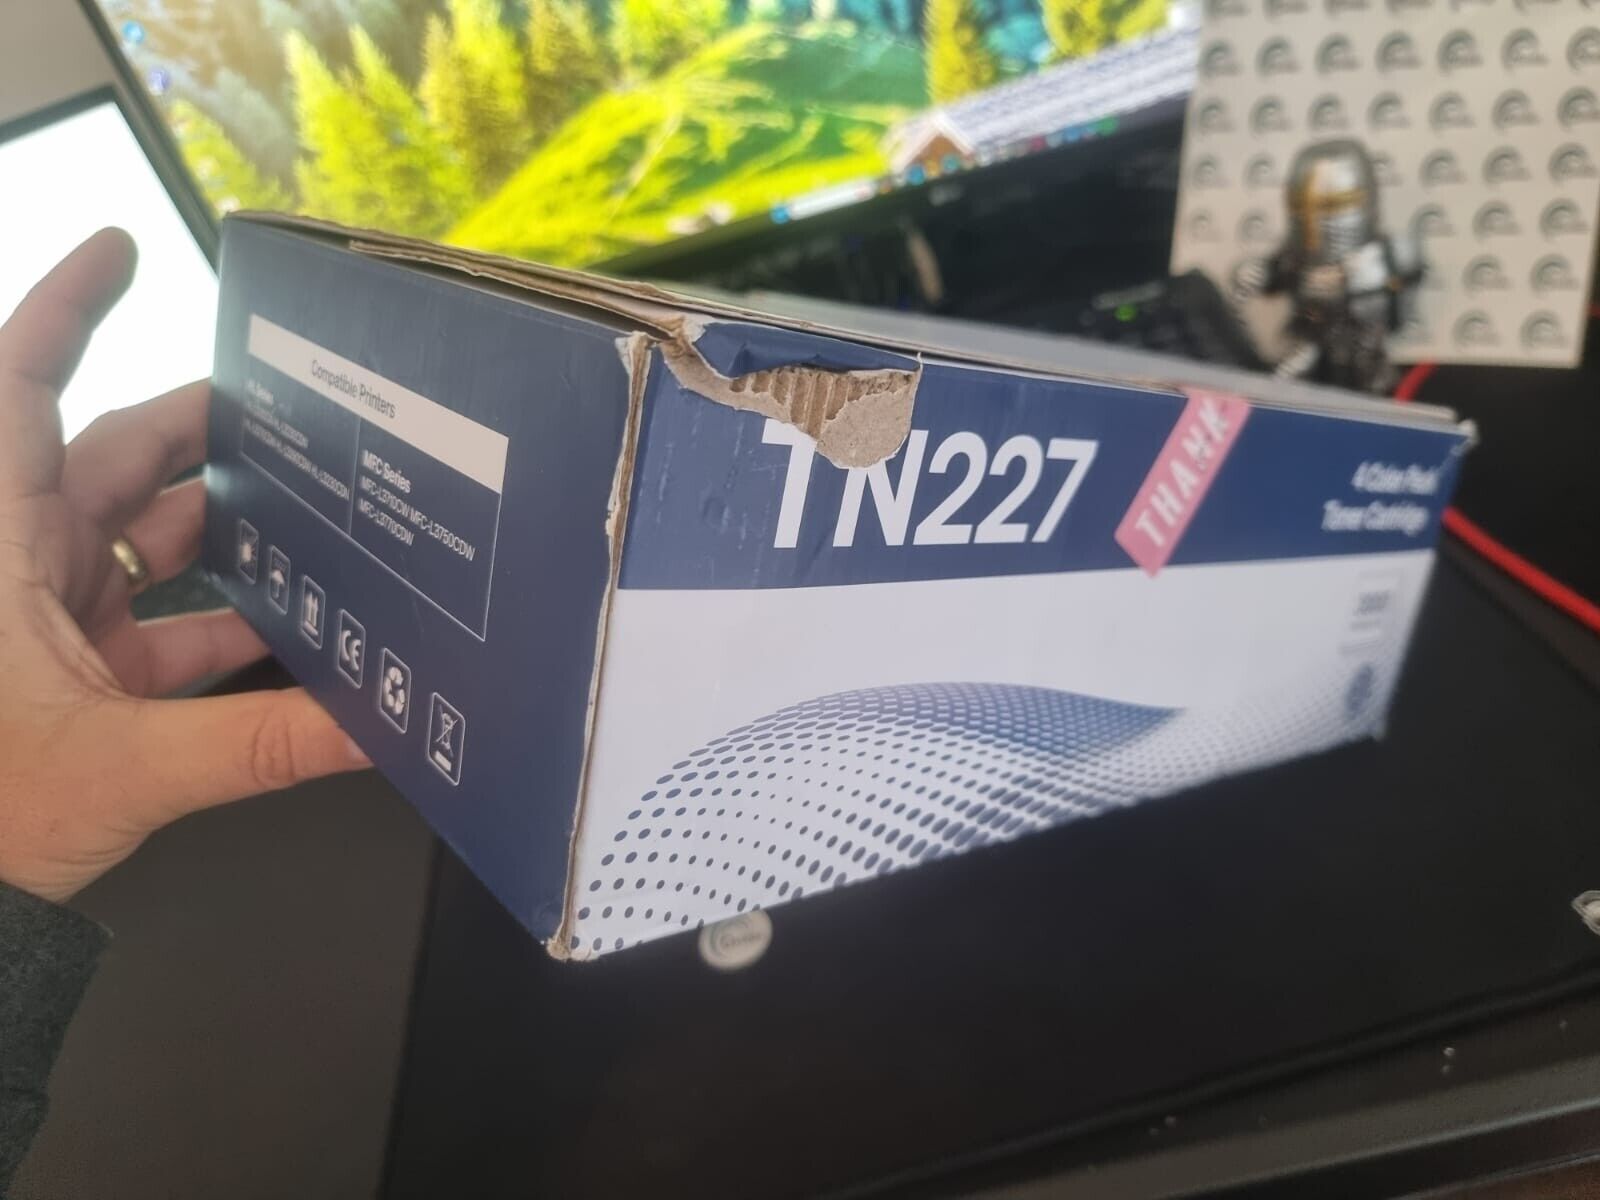 Unbranded TN227 3000 High Yield Toner Cartridge - 4 Color Pack (Open Box) $58.90